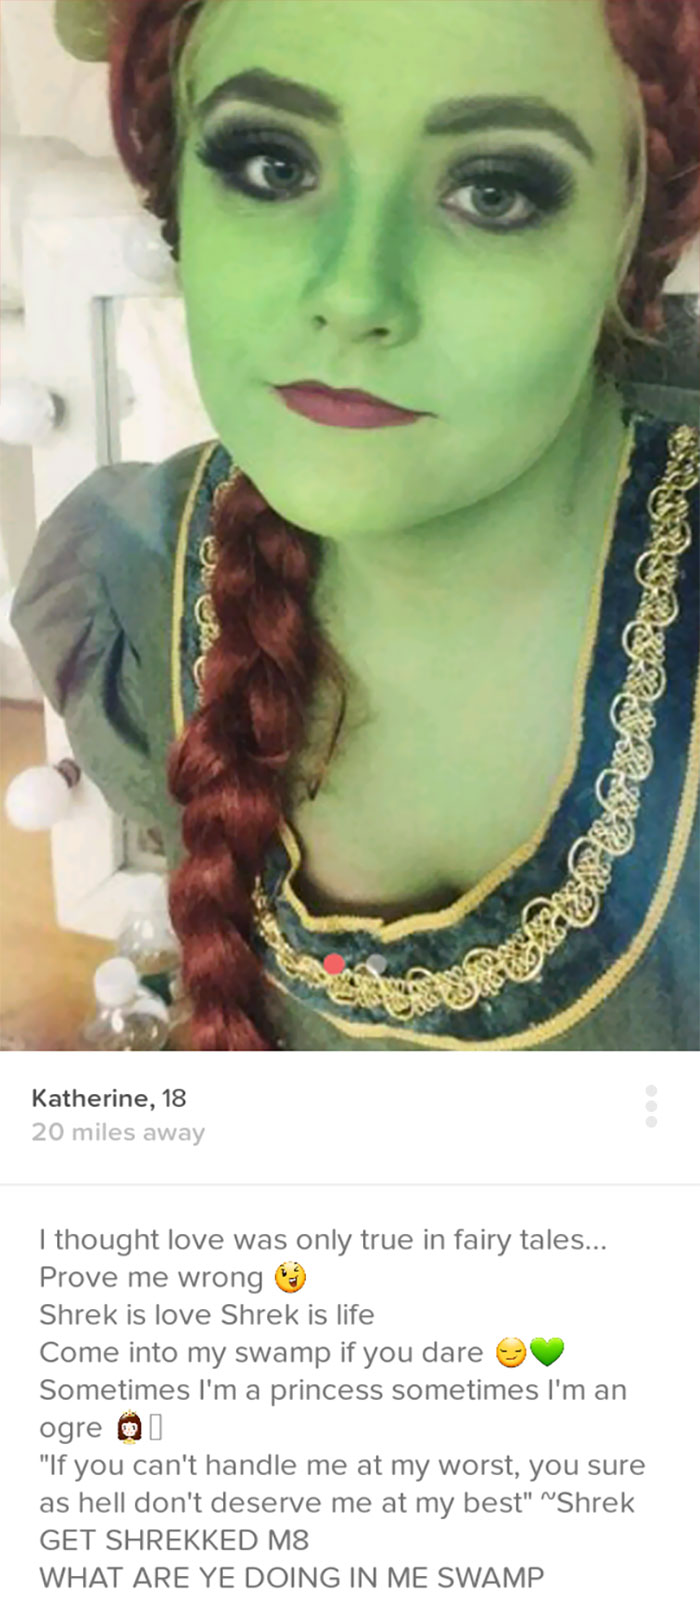 Tinder profile of a woman dressed as Fiona from Shrek 